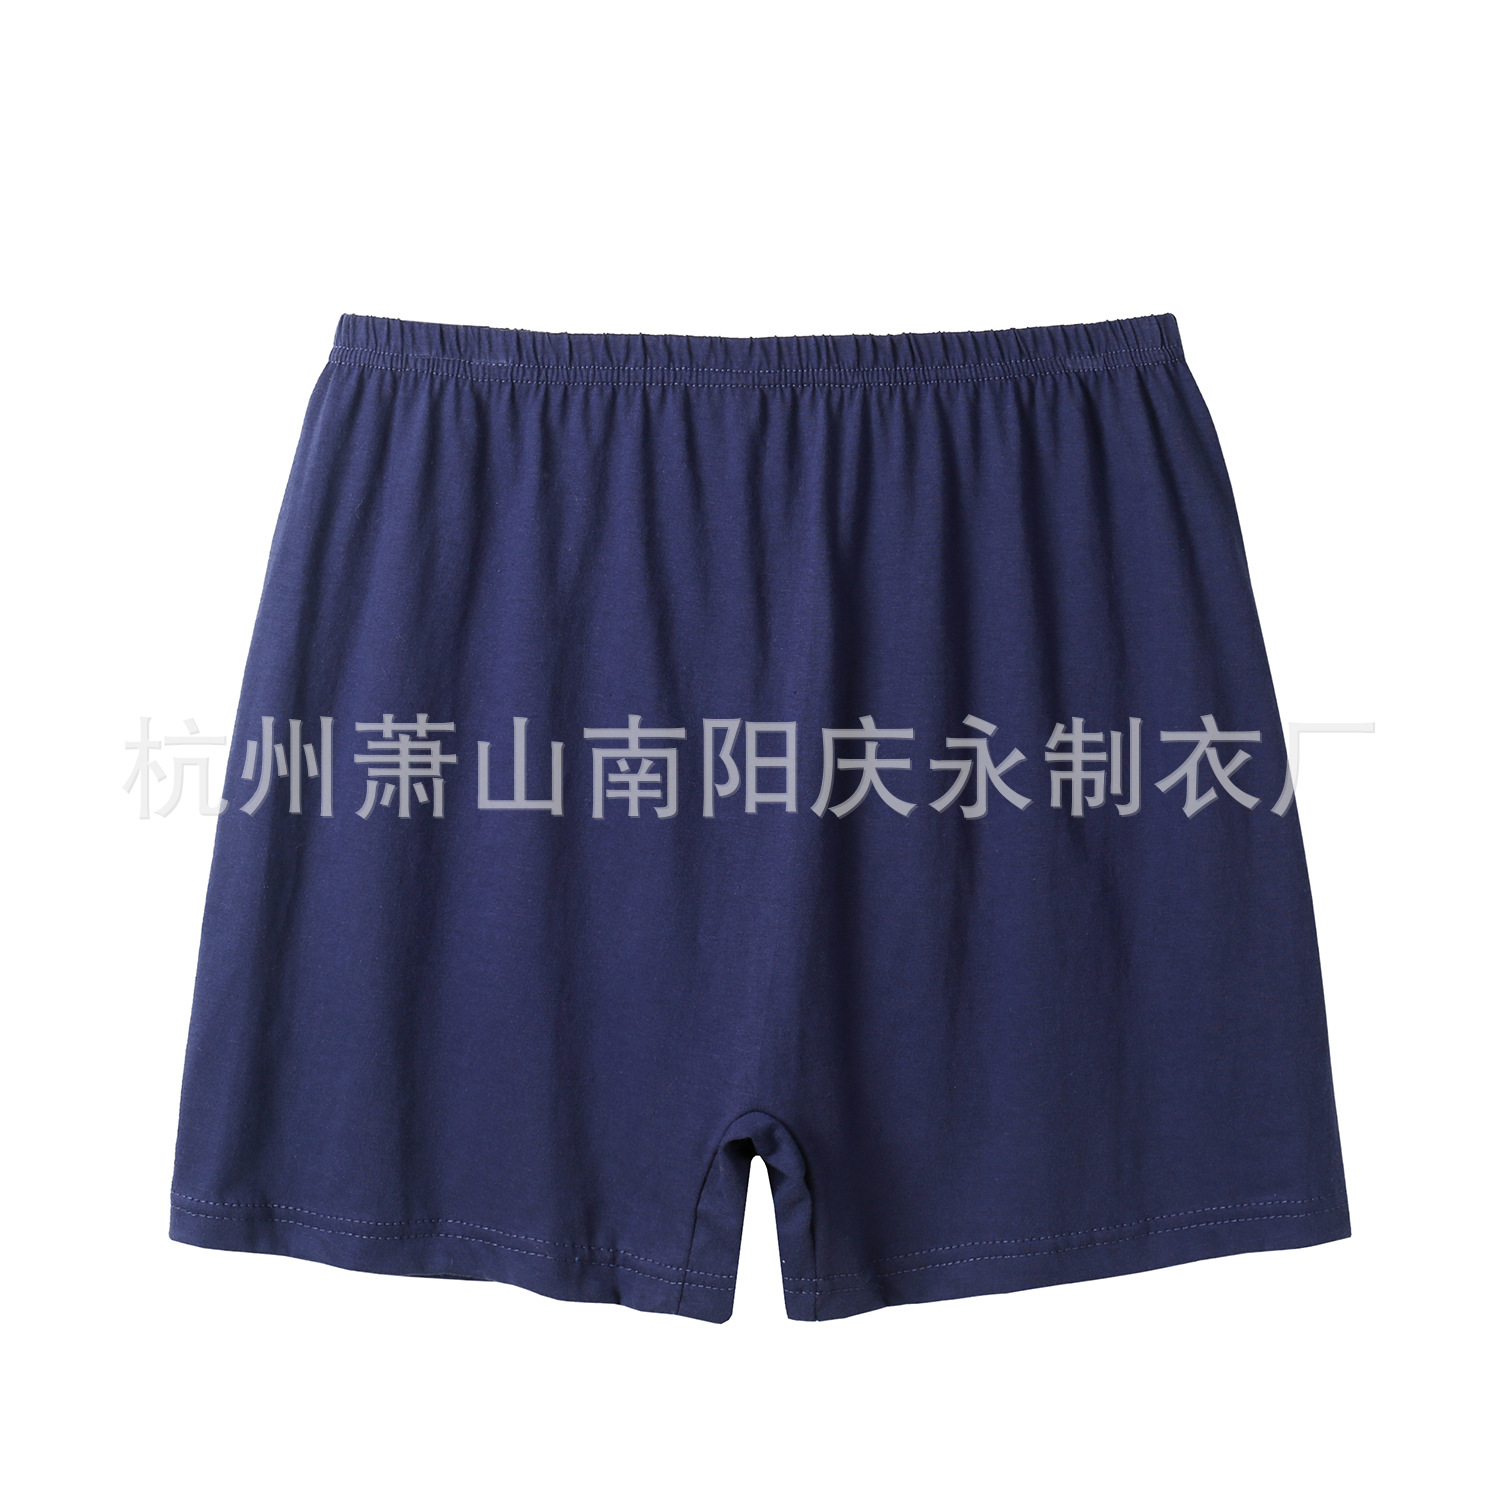 Men's Boxers Middle-Aged and Elderly Cotton Underwear Comfortable Breathable Boxer Briefs